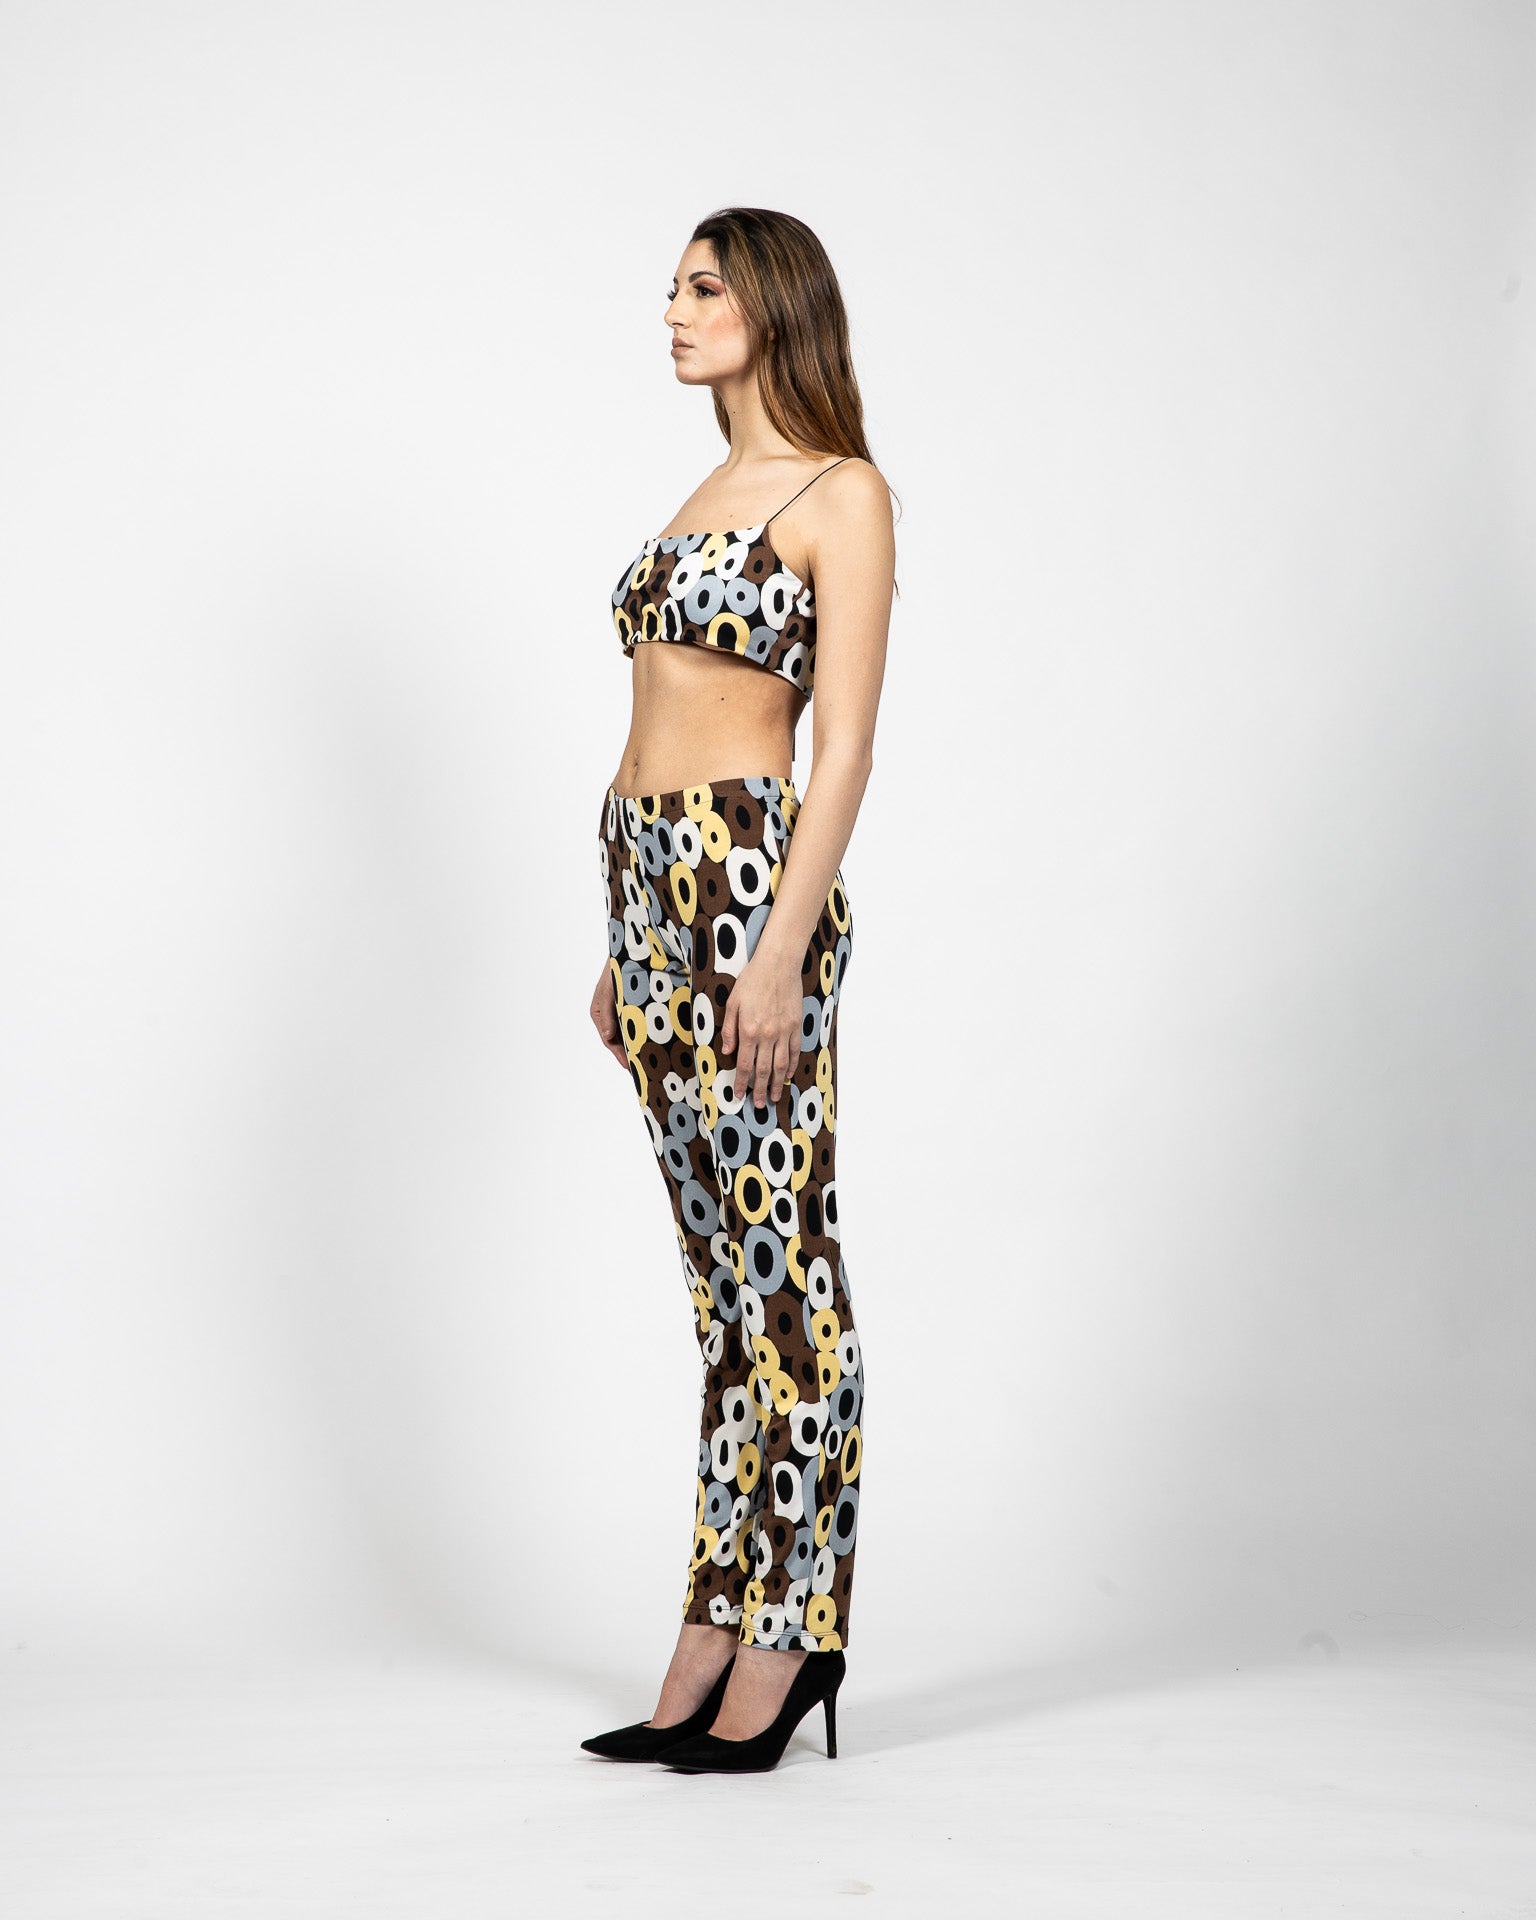 Cropped Bra Top With Matching Pants - Side View - Samuel Vartan